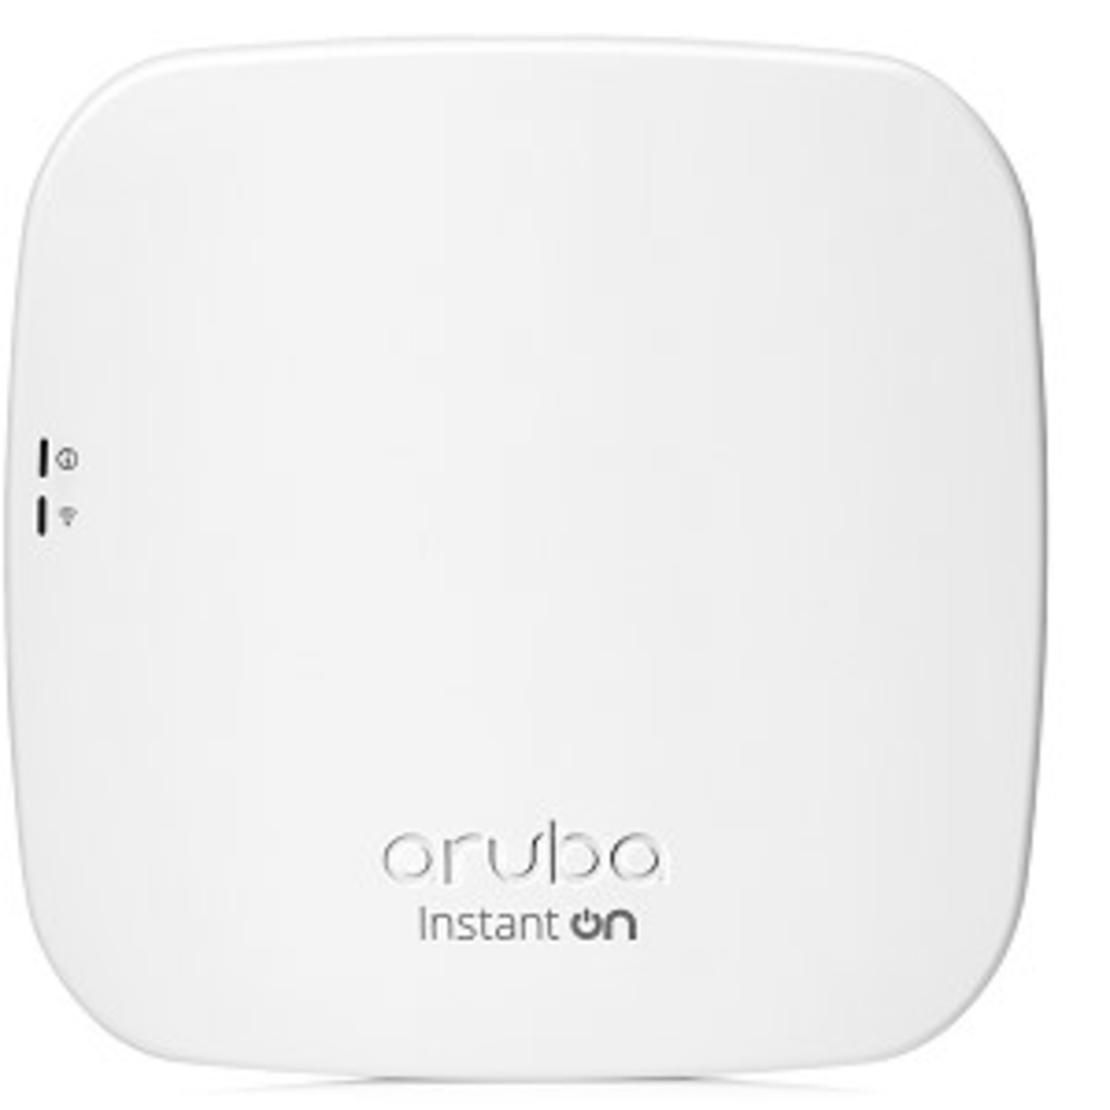 Aruba Instant on Access Point D.band AP11 W/POE HP